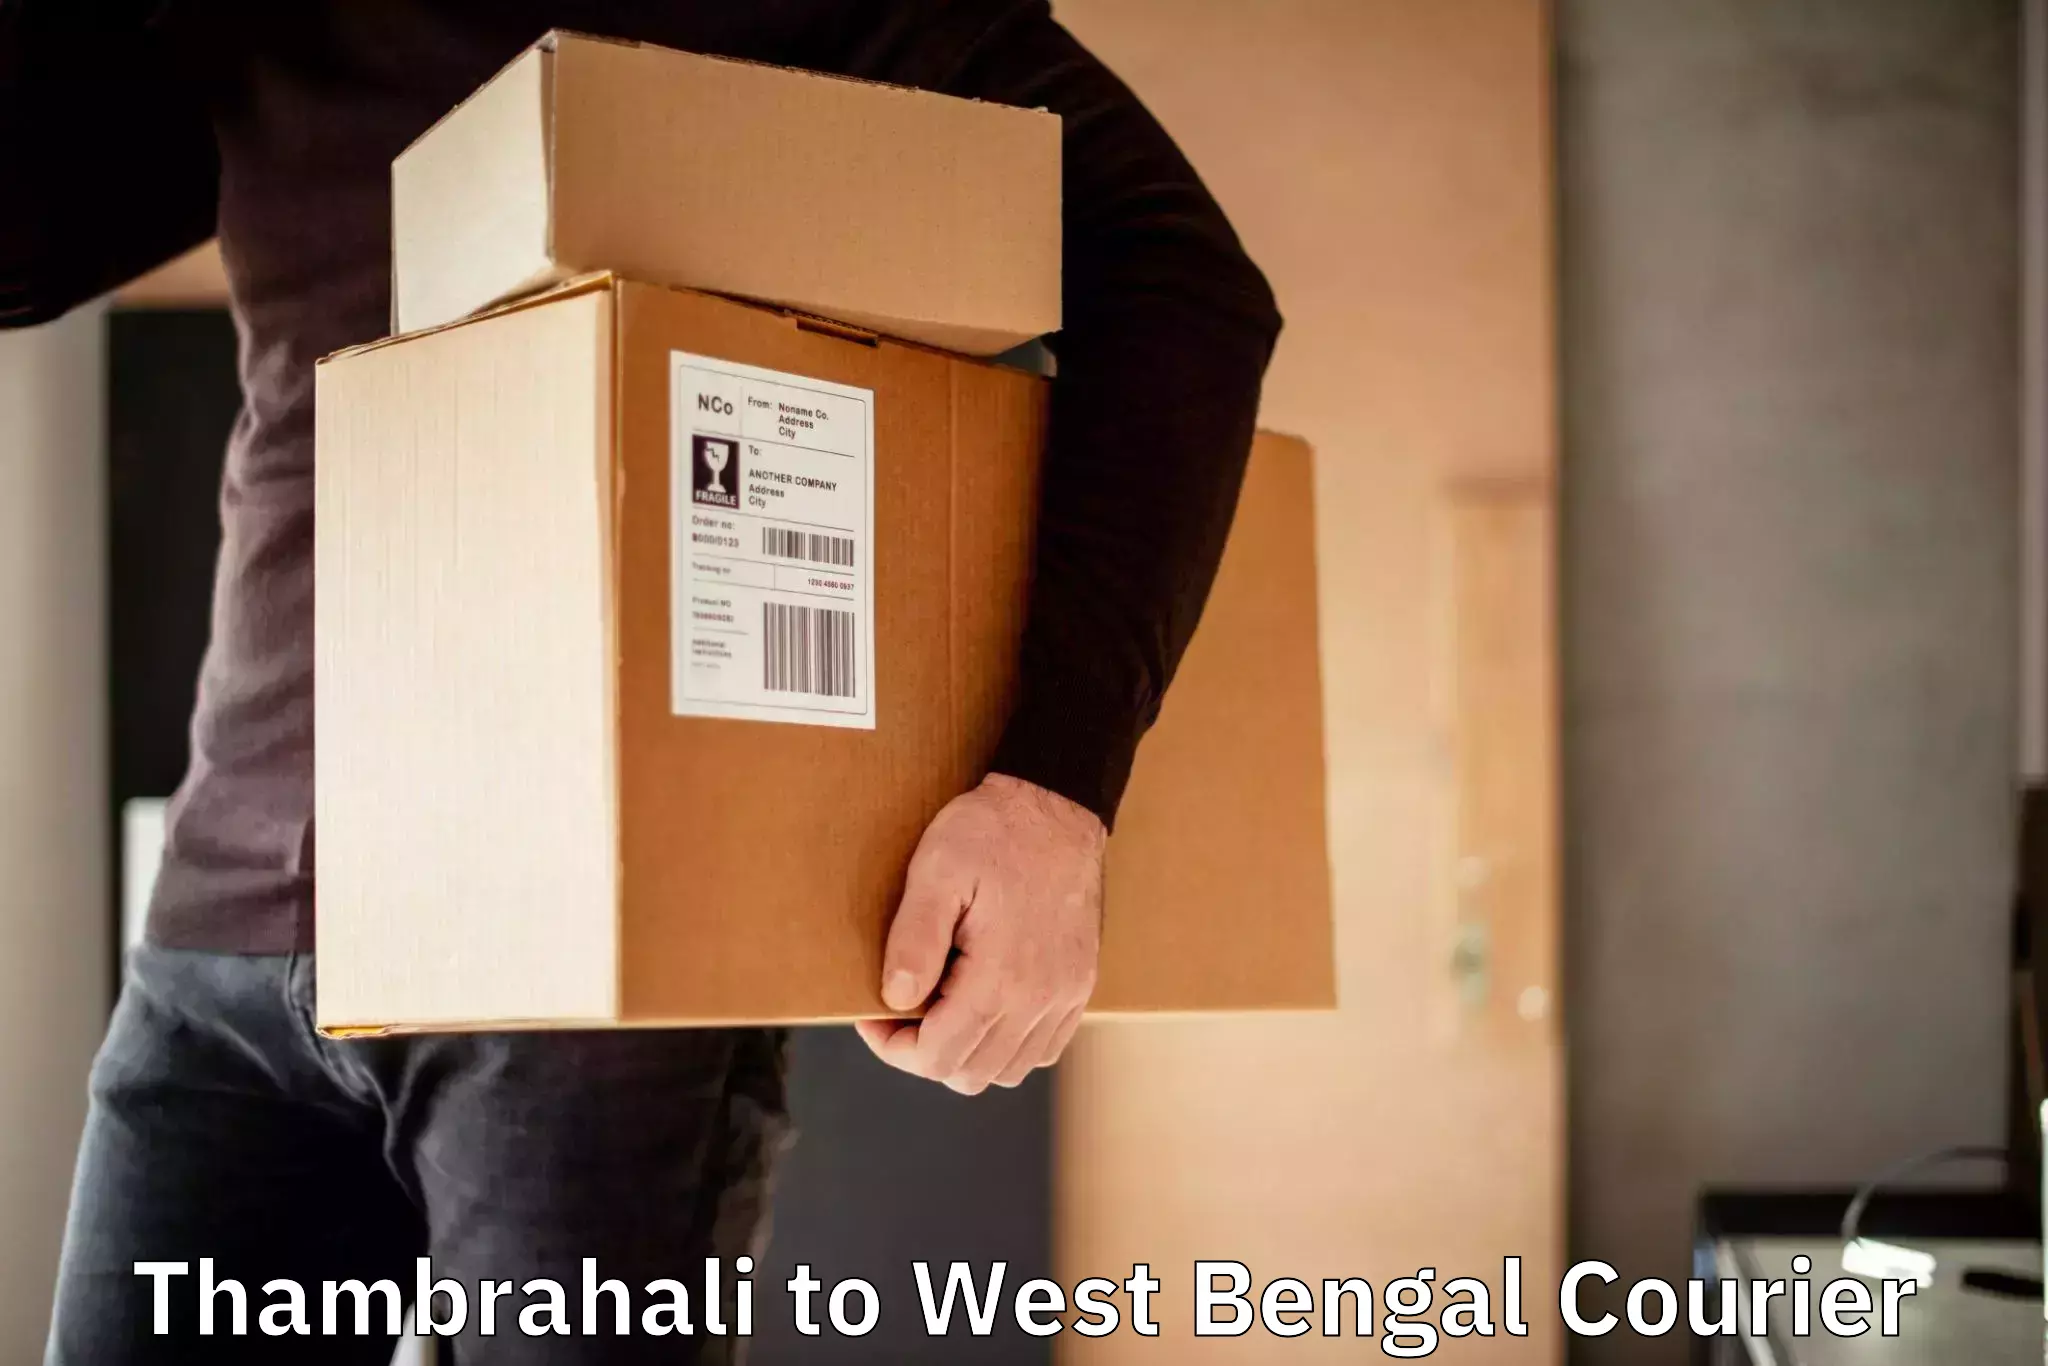 Nationwide parcel services Thambrahali to West Bengal